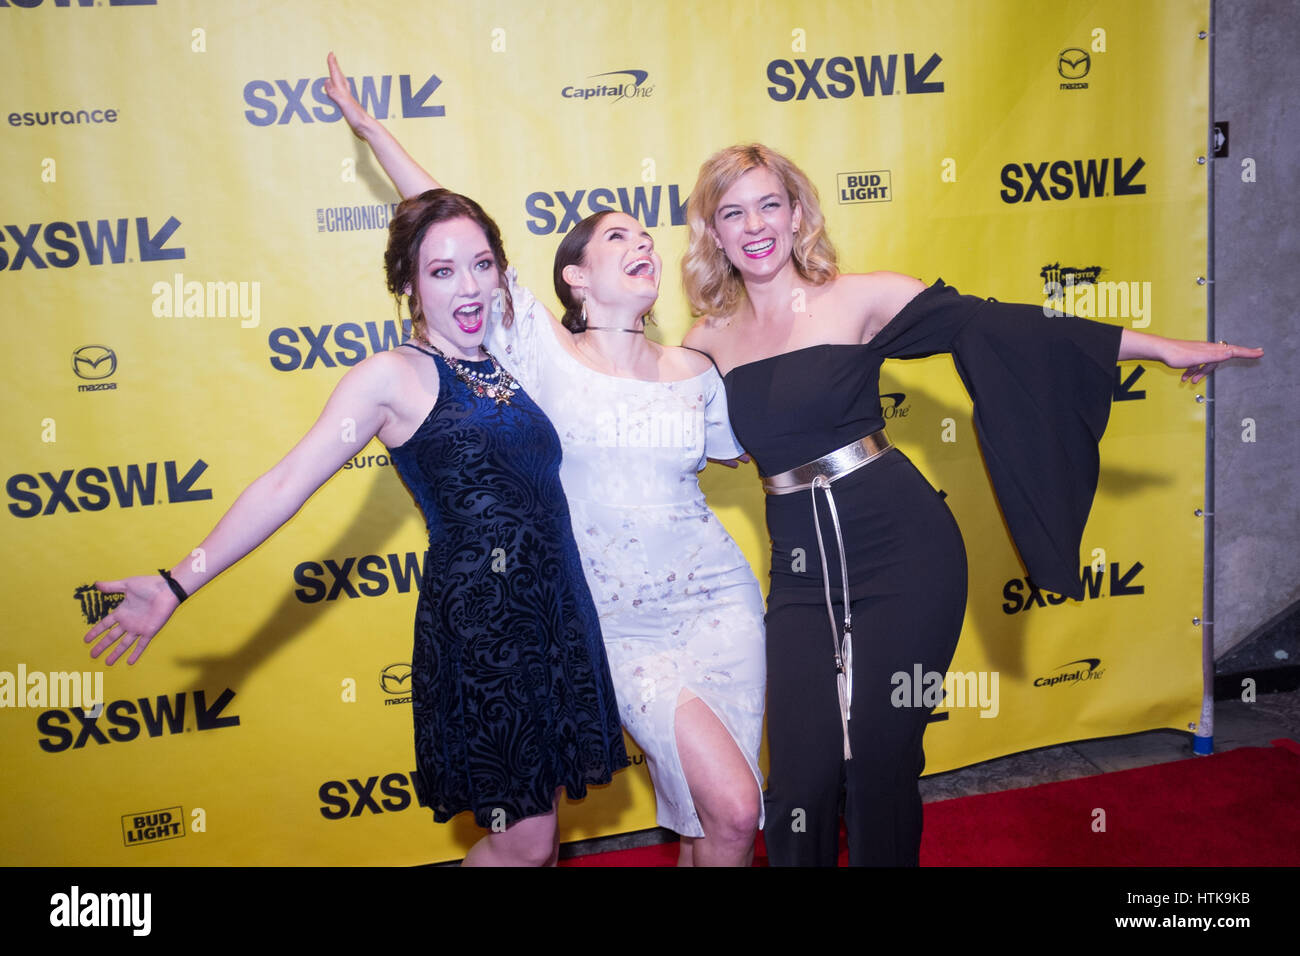 Austin, Texas, USA. 12th March 2017. (L-R) JOSEPHINE MACADAM, OLIVIA APPLEGATE and KATIE FOLGER attend world premiere of the Honor Farm at the Stateside Theater during SXSW Austin, Texas Credit: Sandy Carson/ZUMA Wire/Alamy Live News Stock Photo